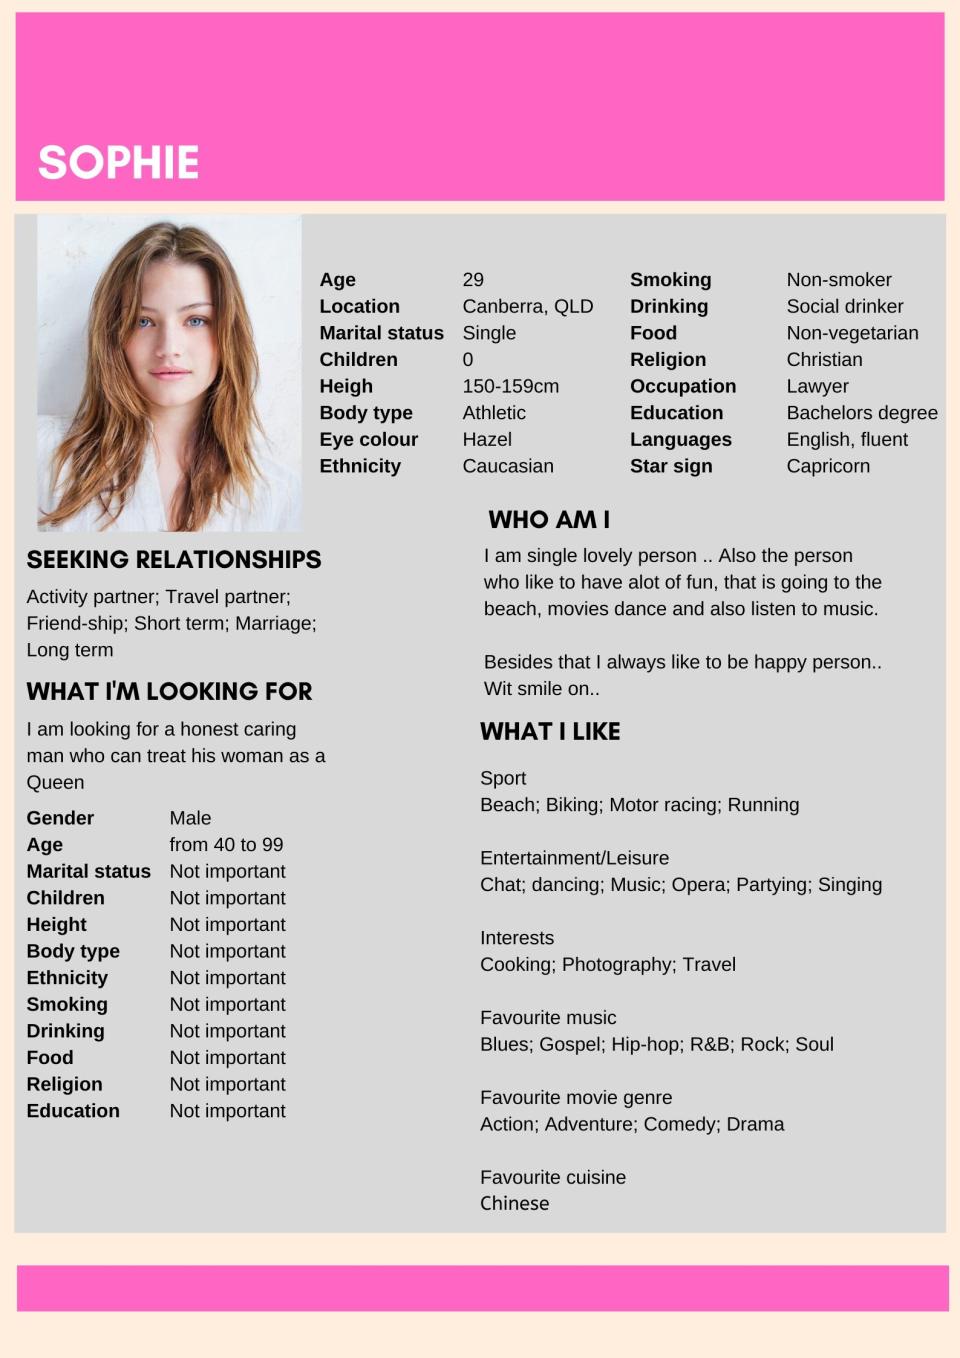 Pictured: Fake dating profile for 'Sophie' a romance scammer. Image: Yahoo Finance with Scamwatch data